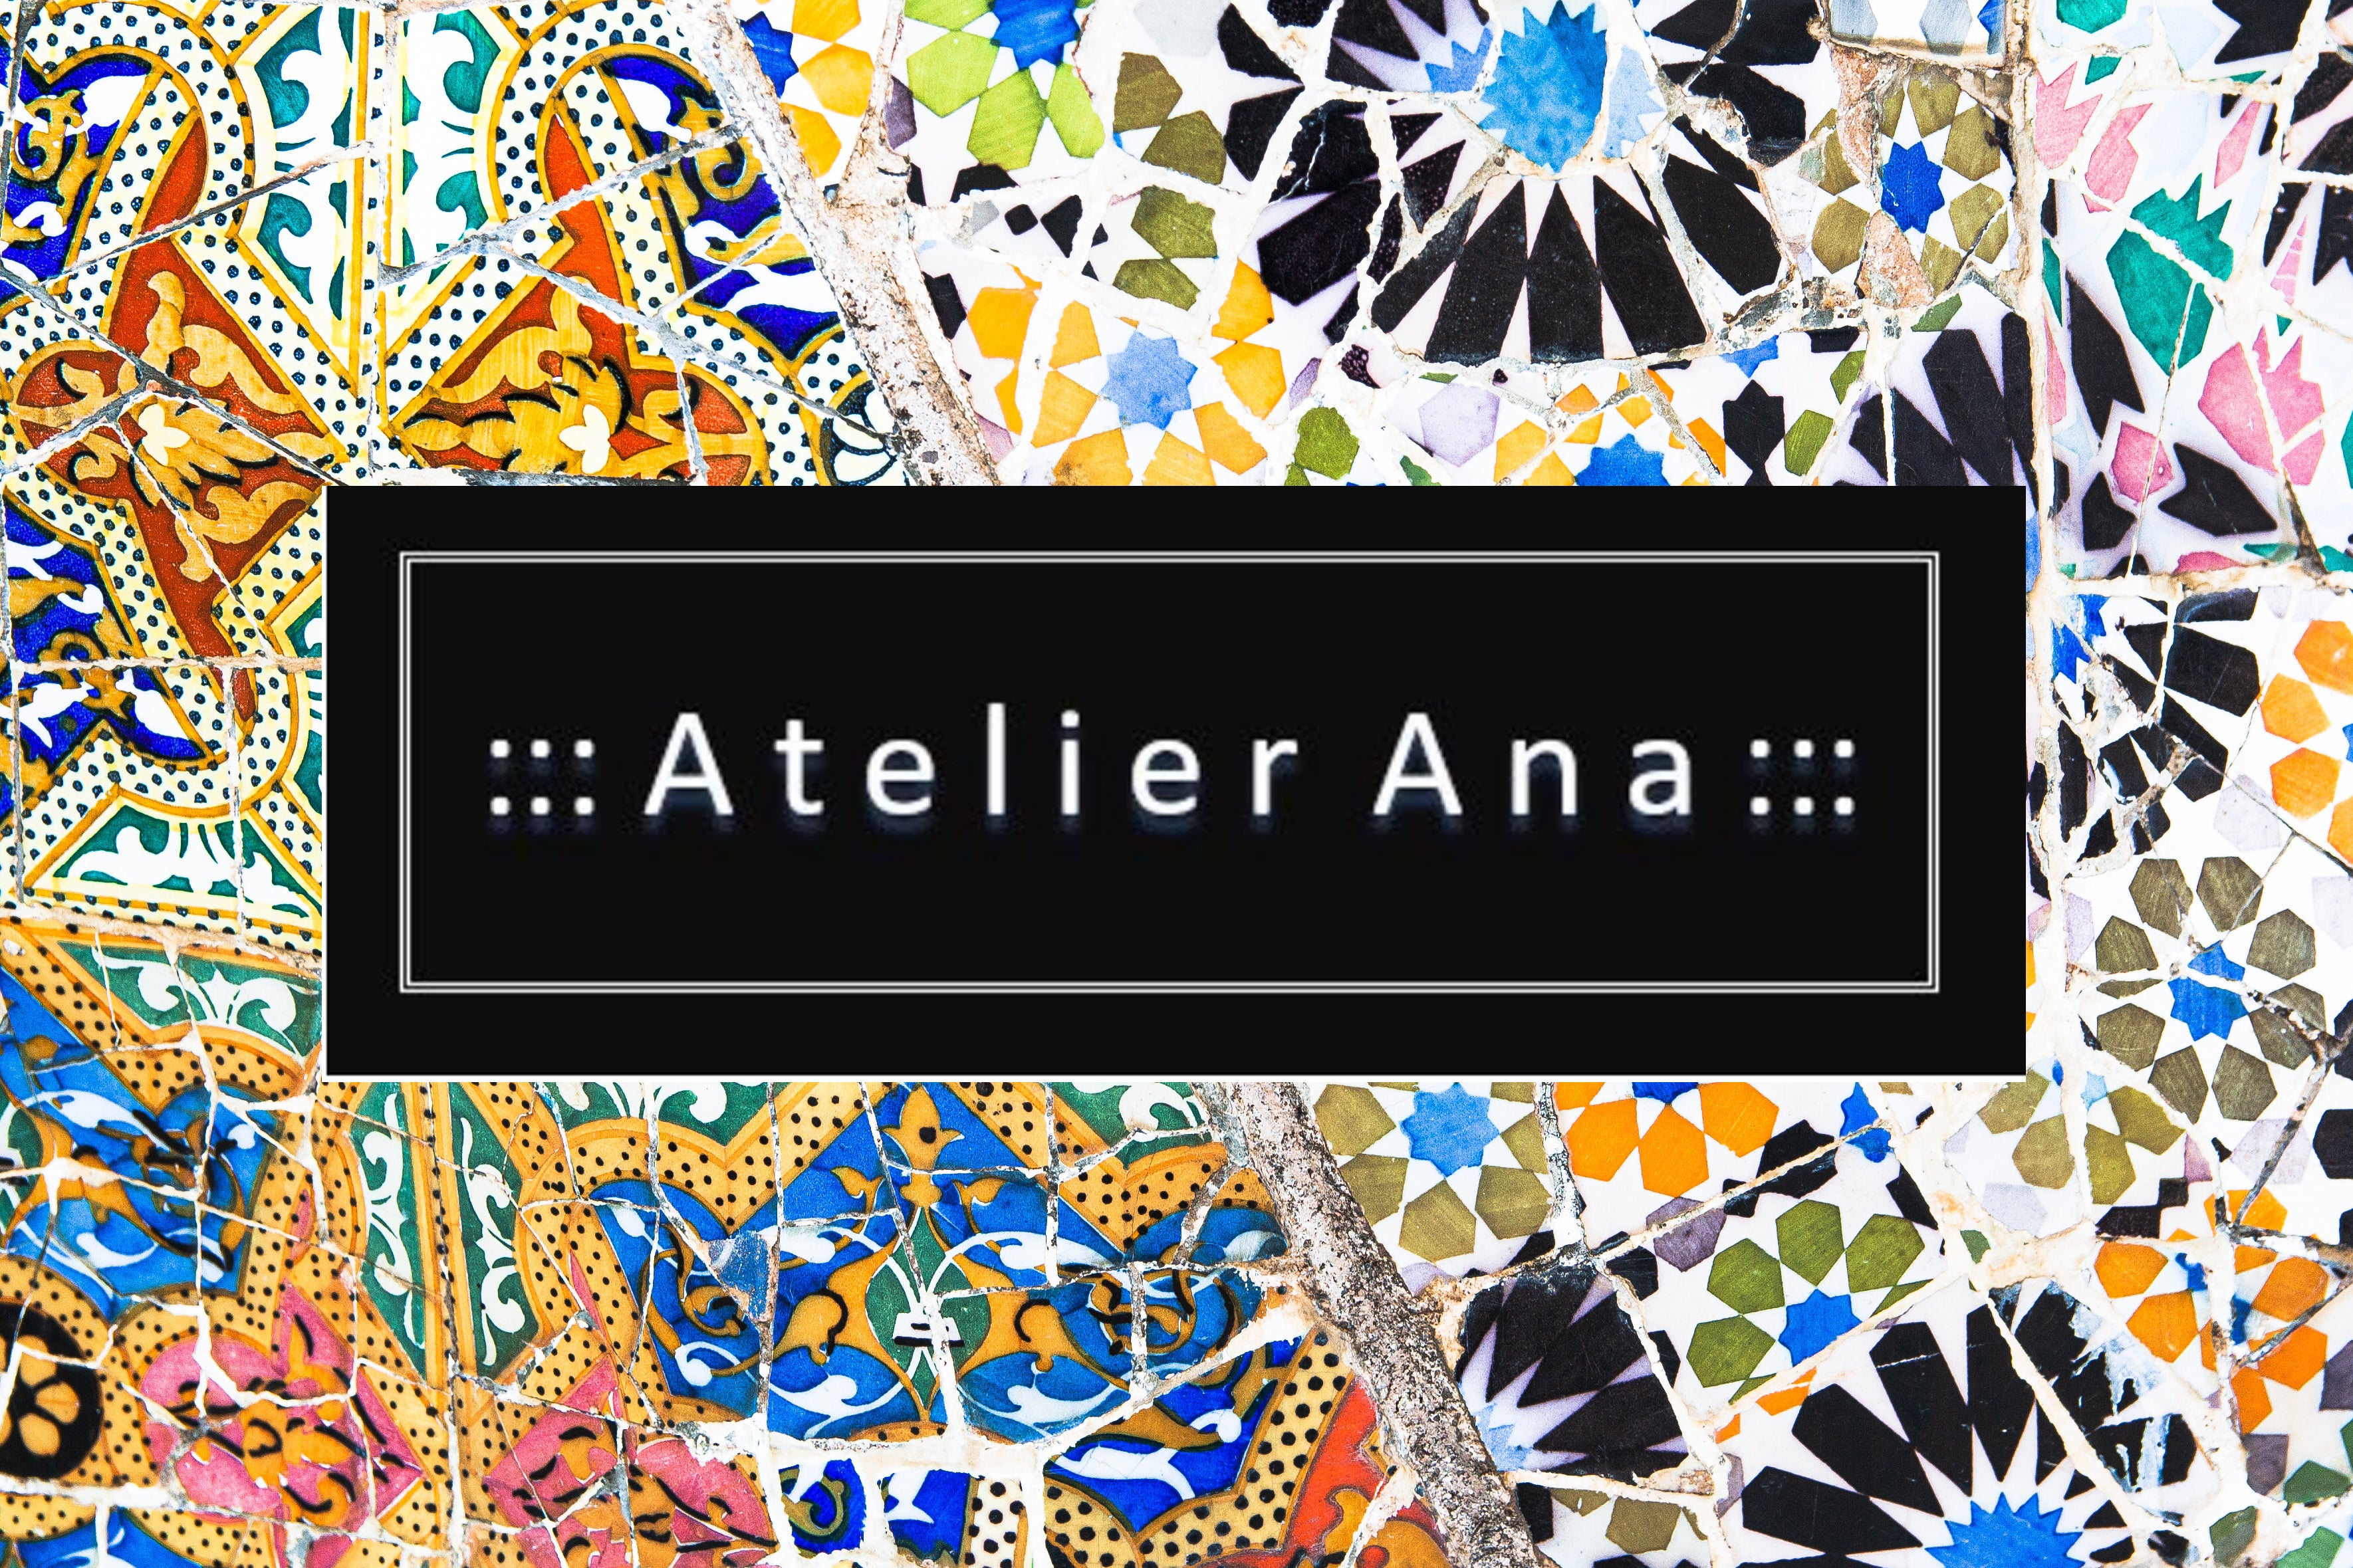 Atelier Ana logo on a background of a Gaudi design